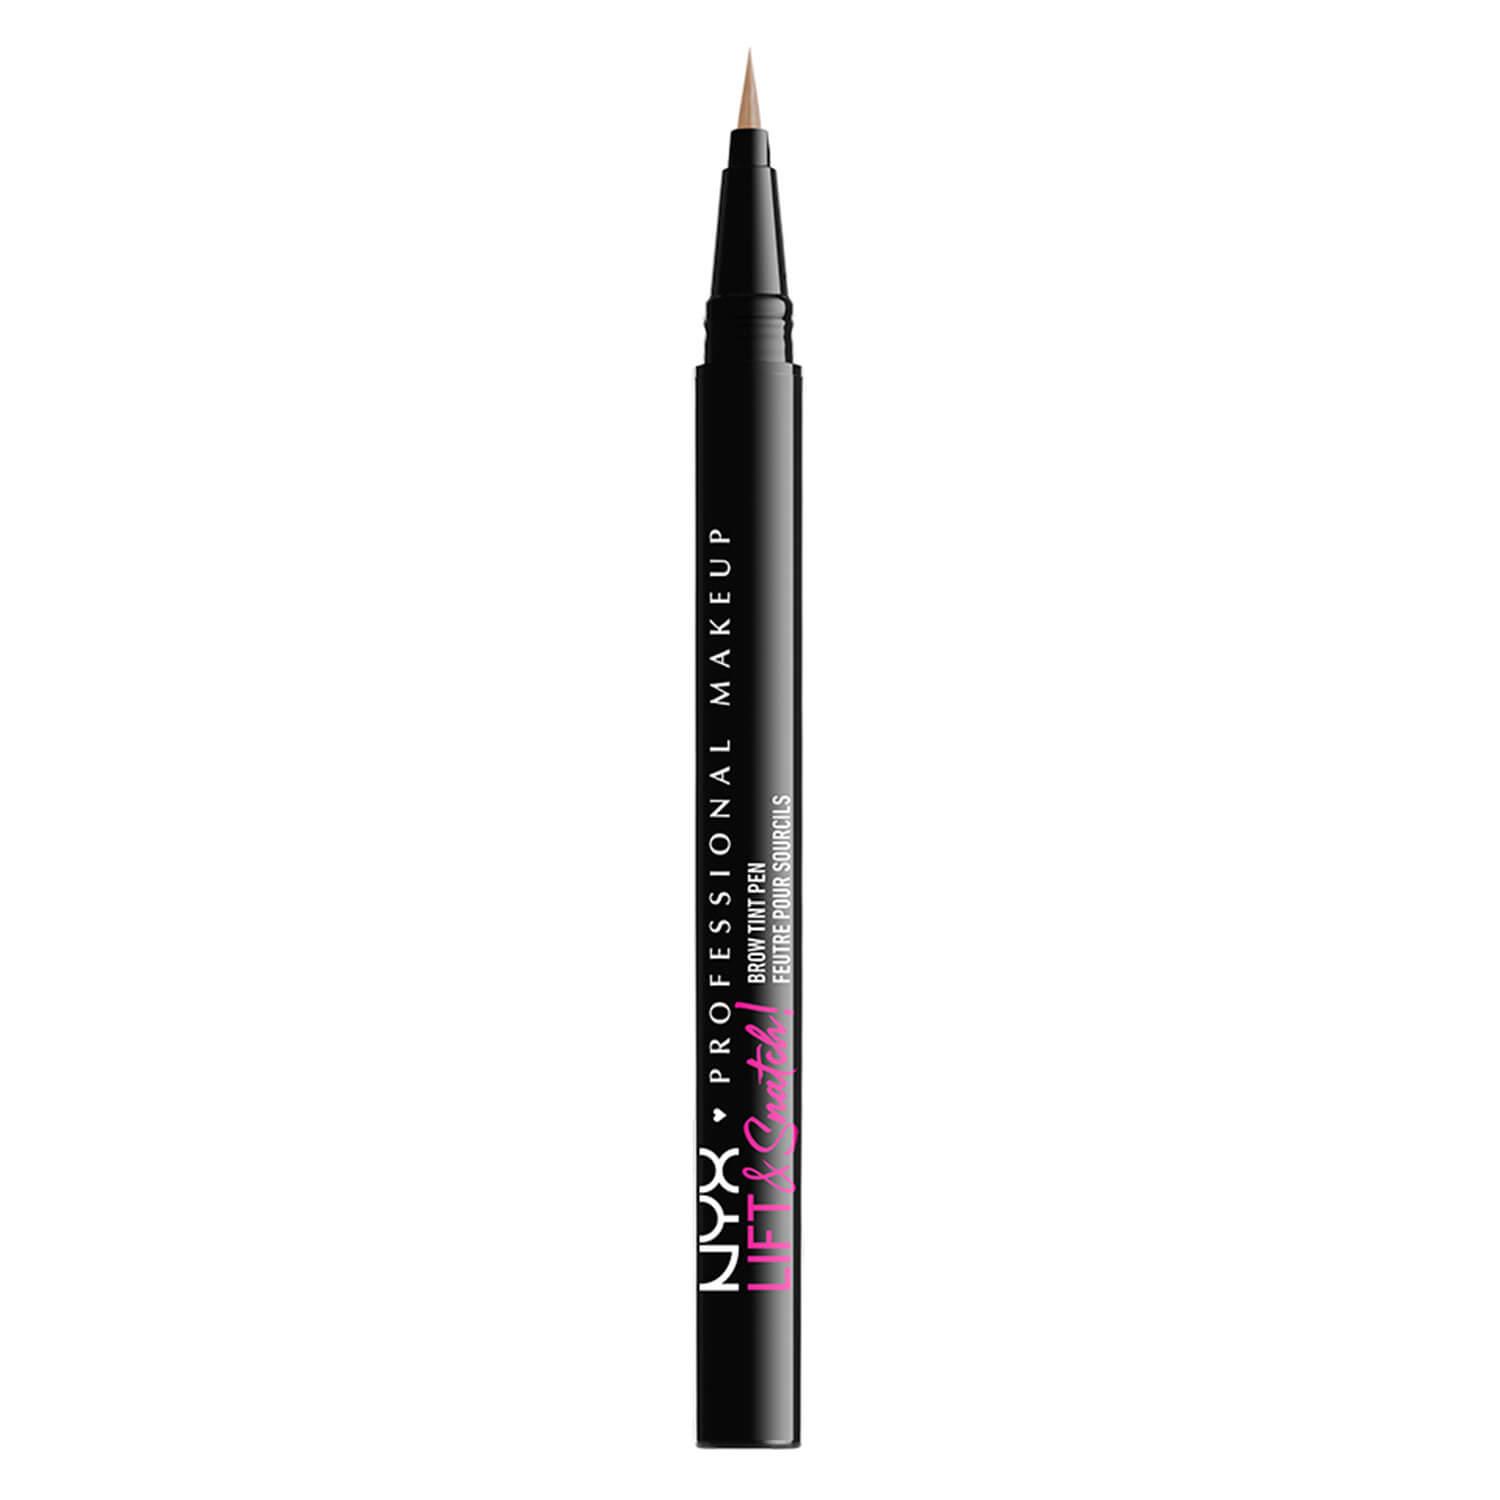 NYX Brows - Lift & Snatch! Brow Tint Pen Blonde 01